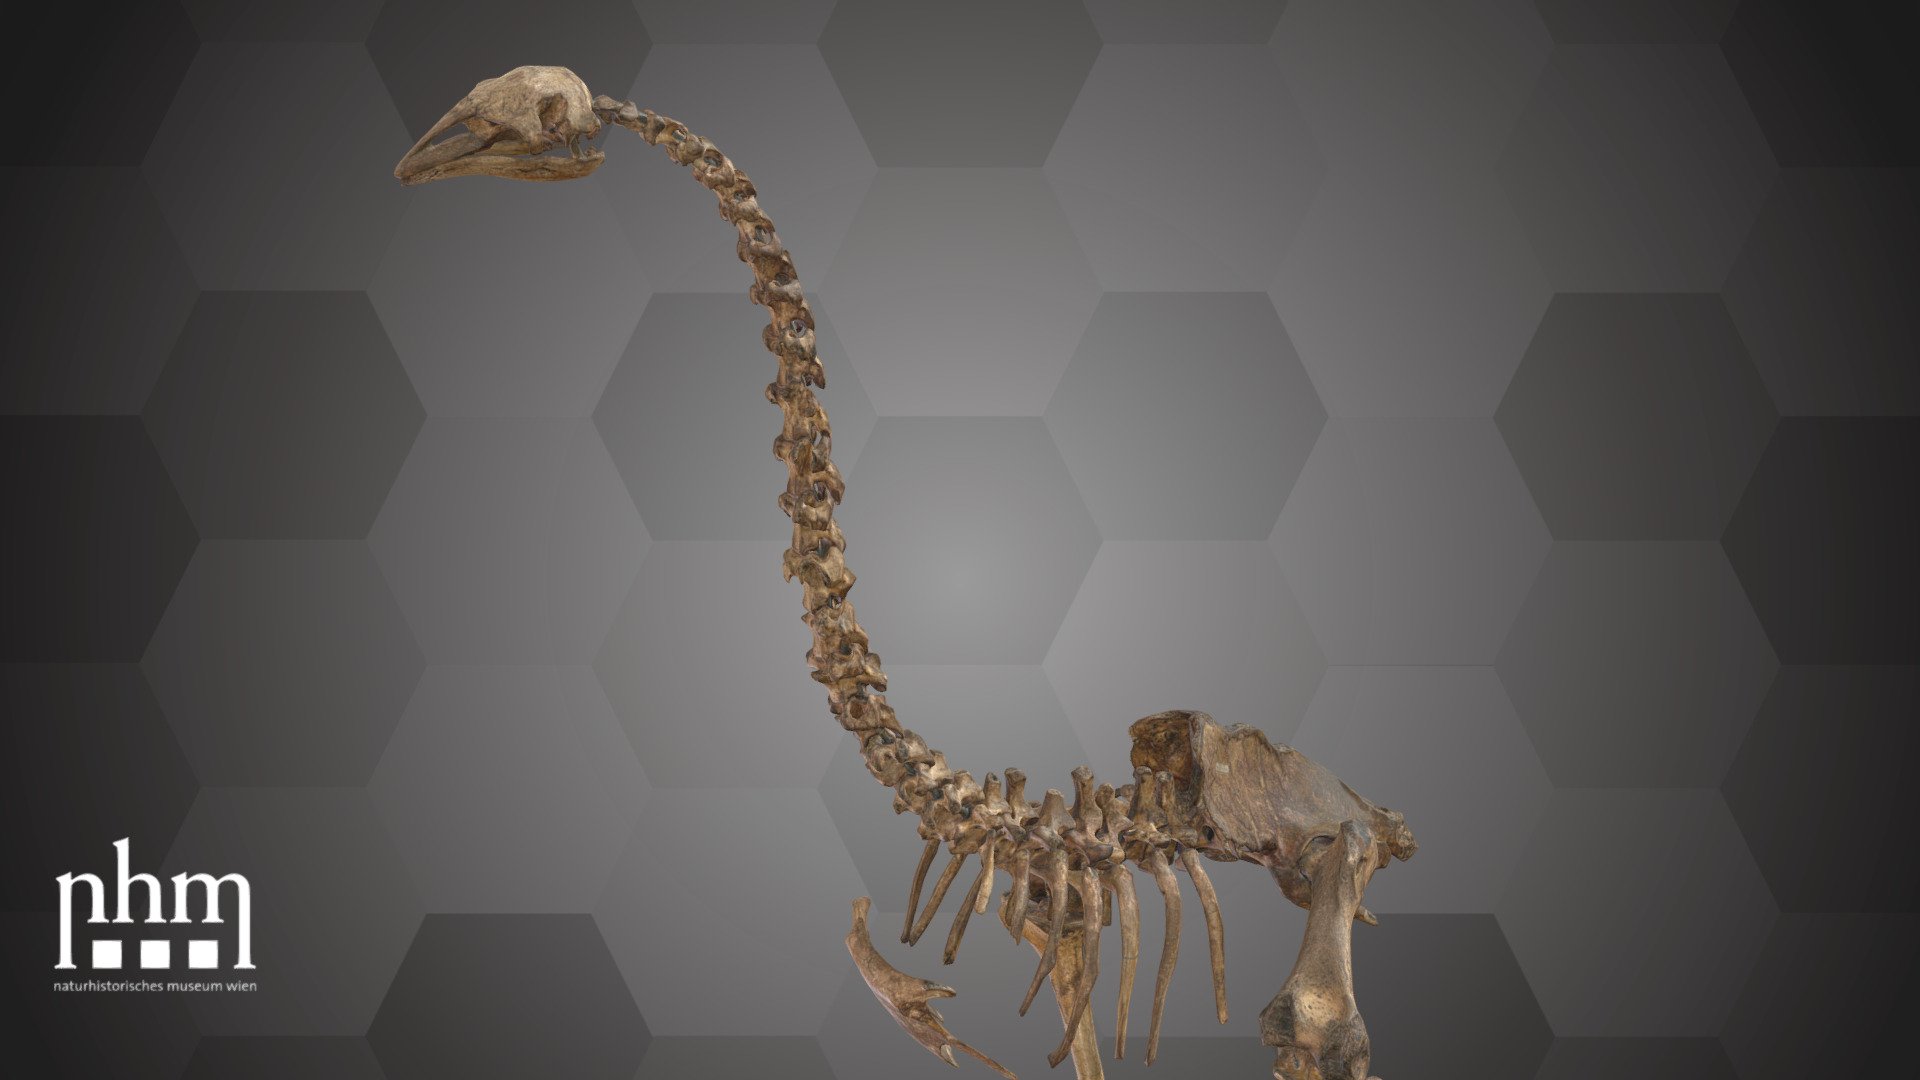 3D scan of a Eastern moa (Emeus crassus) skeleton from the Pleistocene. Moas are extinct birds that lived on New Zealand. This skeleton was gifted to the museum by Dr. Julius Ritter von Haast. 

This specific skeleton is housed backstage, but complete skeletons of both a giant moa (Dinornis maximus) and another Eastern moa are number 77 of the NHM Top 100 and can be found in Hall 30 of the NHM Vienna. Three more skeletons of different moa species (Dinornis struthioides, Dinornis elephantopus and Dinornis gravis) are displayed in the Ice Age (Eiszeit) corridor.

Specimen: Eastern moa, Emeus crassus (Owen, 1846) 

Inventory number: NHMW-Geo 2021/0008/0001

Collection: Natural History Museum Vienna, Geology &amp; Paleontology Dept., Vertebrate Coll. (curator: Ursula Göhlich)

Find out more about the NHMW here.

Scanned &amp; edited by Nikola Brodtmann, Anna Haider &amp; Viola Winkler (NHMW)

Scanner: Artec Leo. Infrastructure funded by the FFG 3d model